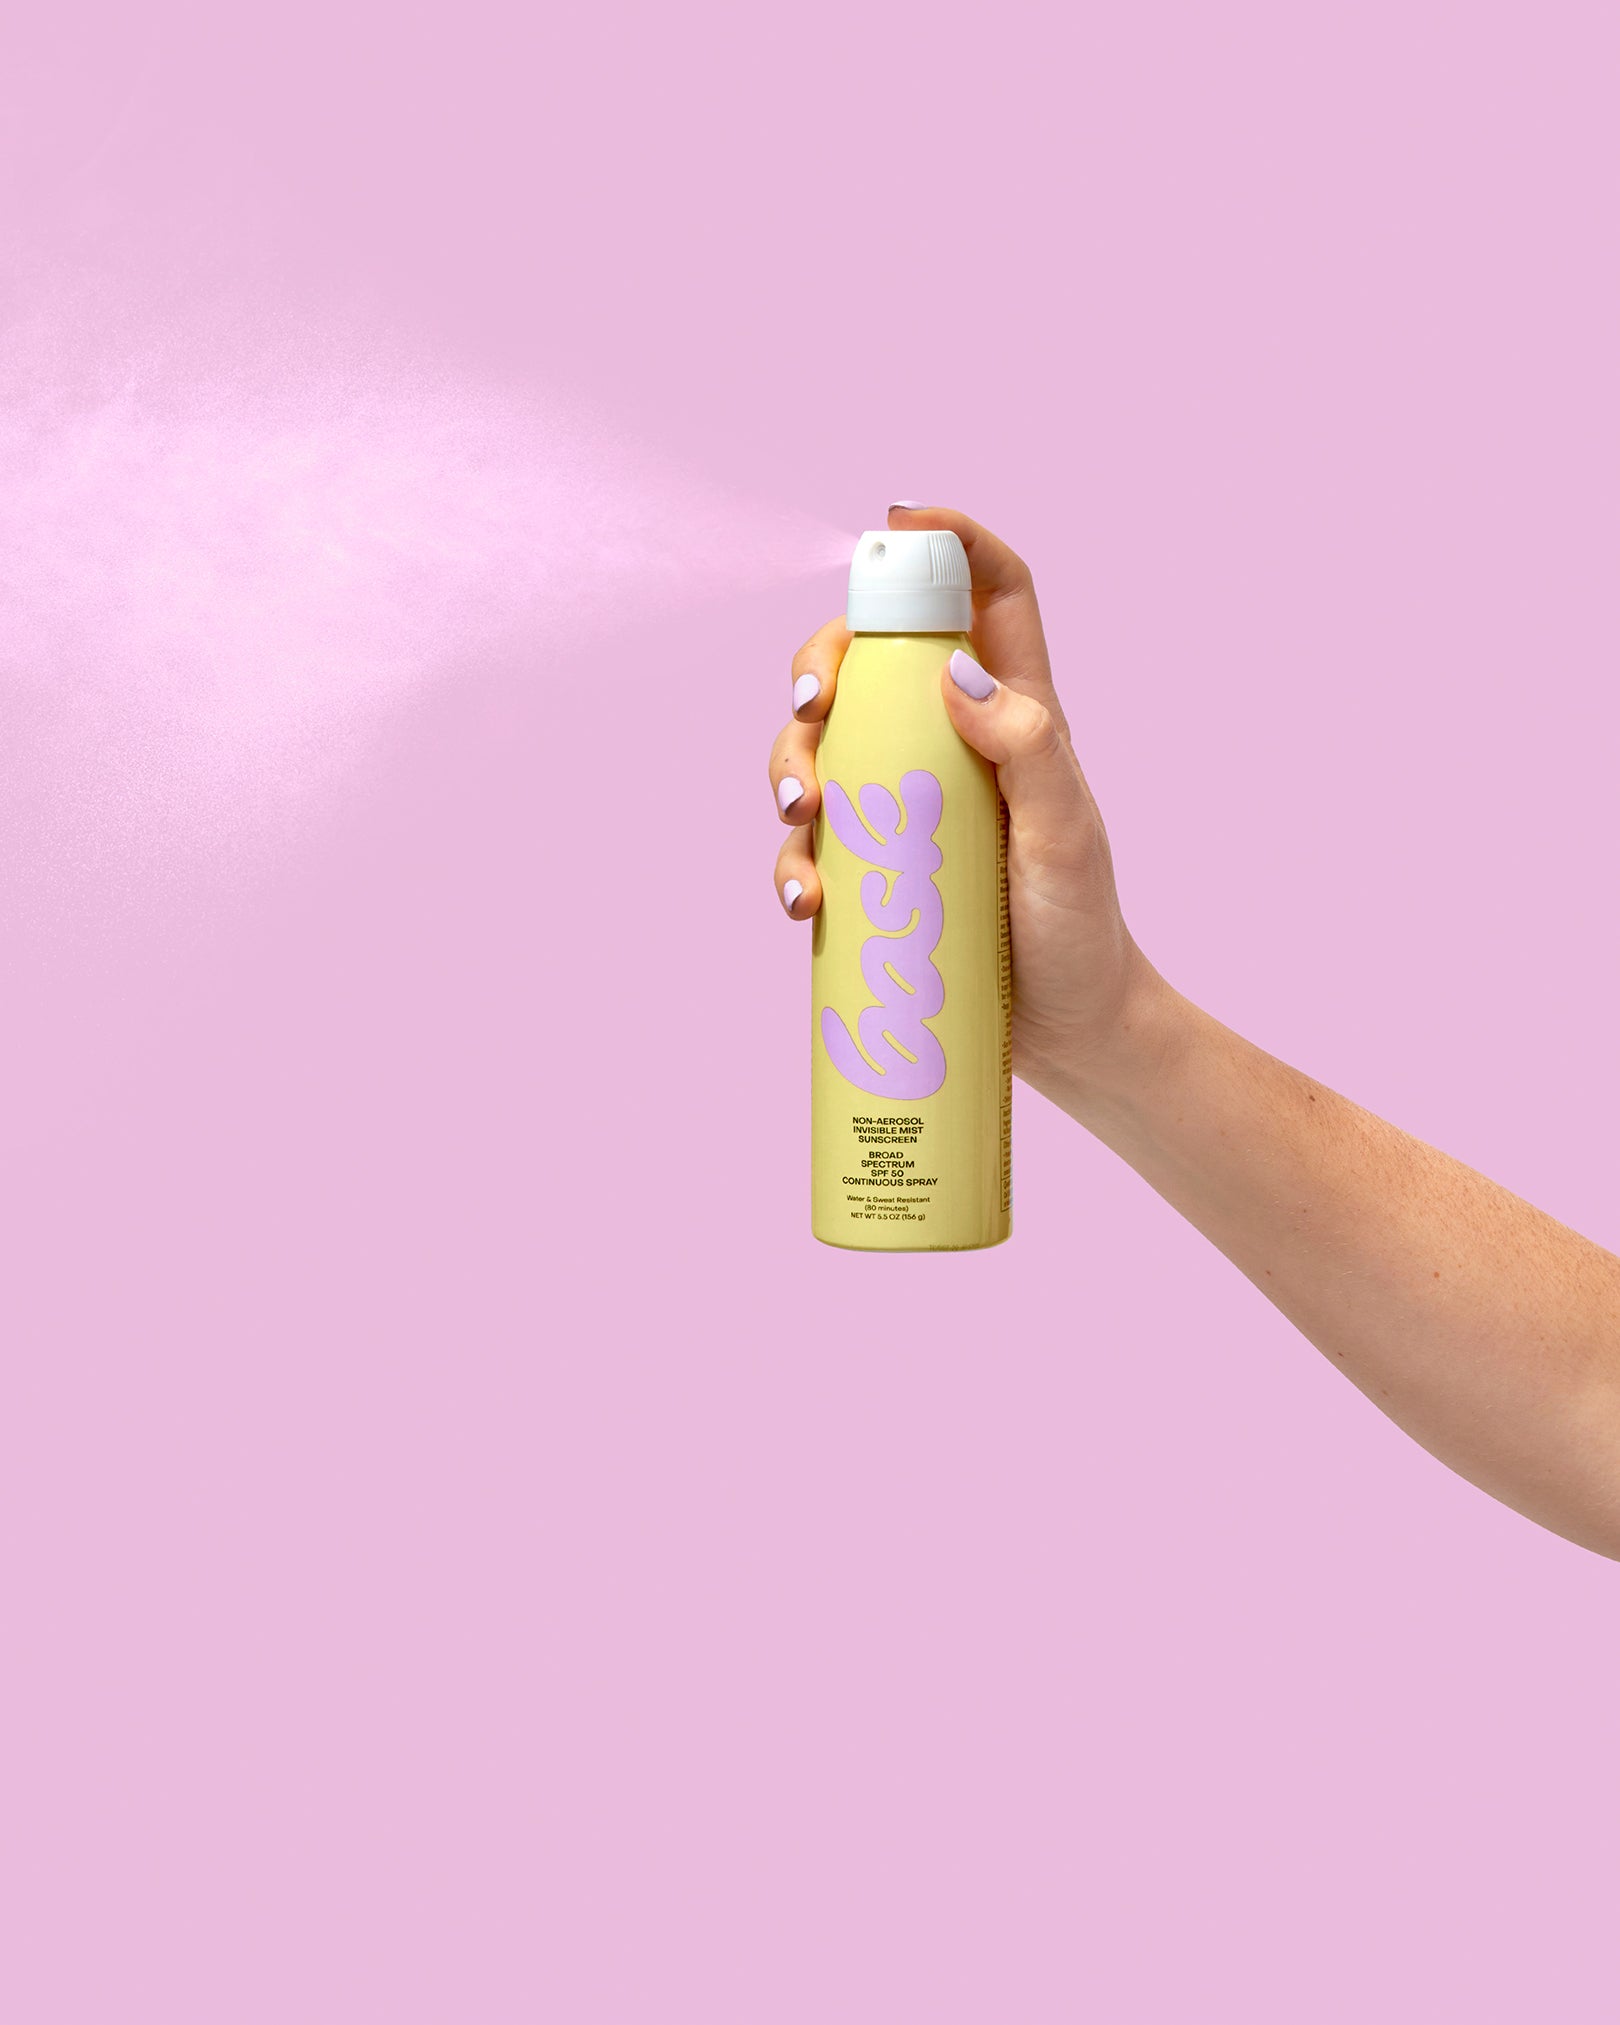 BASK Non-aerosol Invisible Mist Sunscreen in SPF 50 available at Lahn.shop